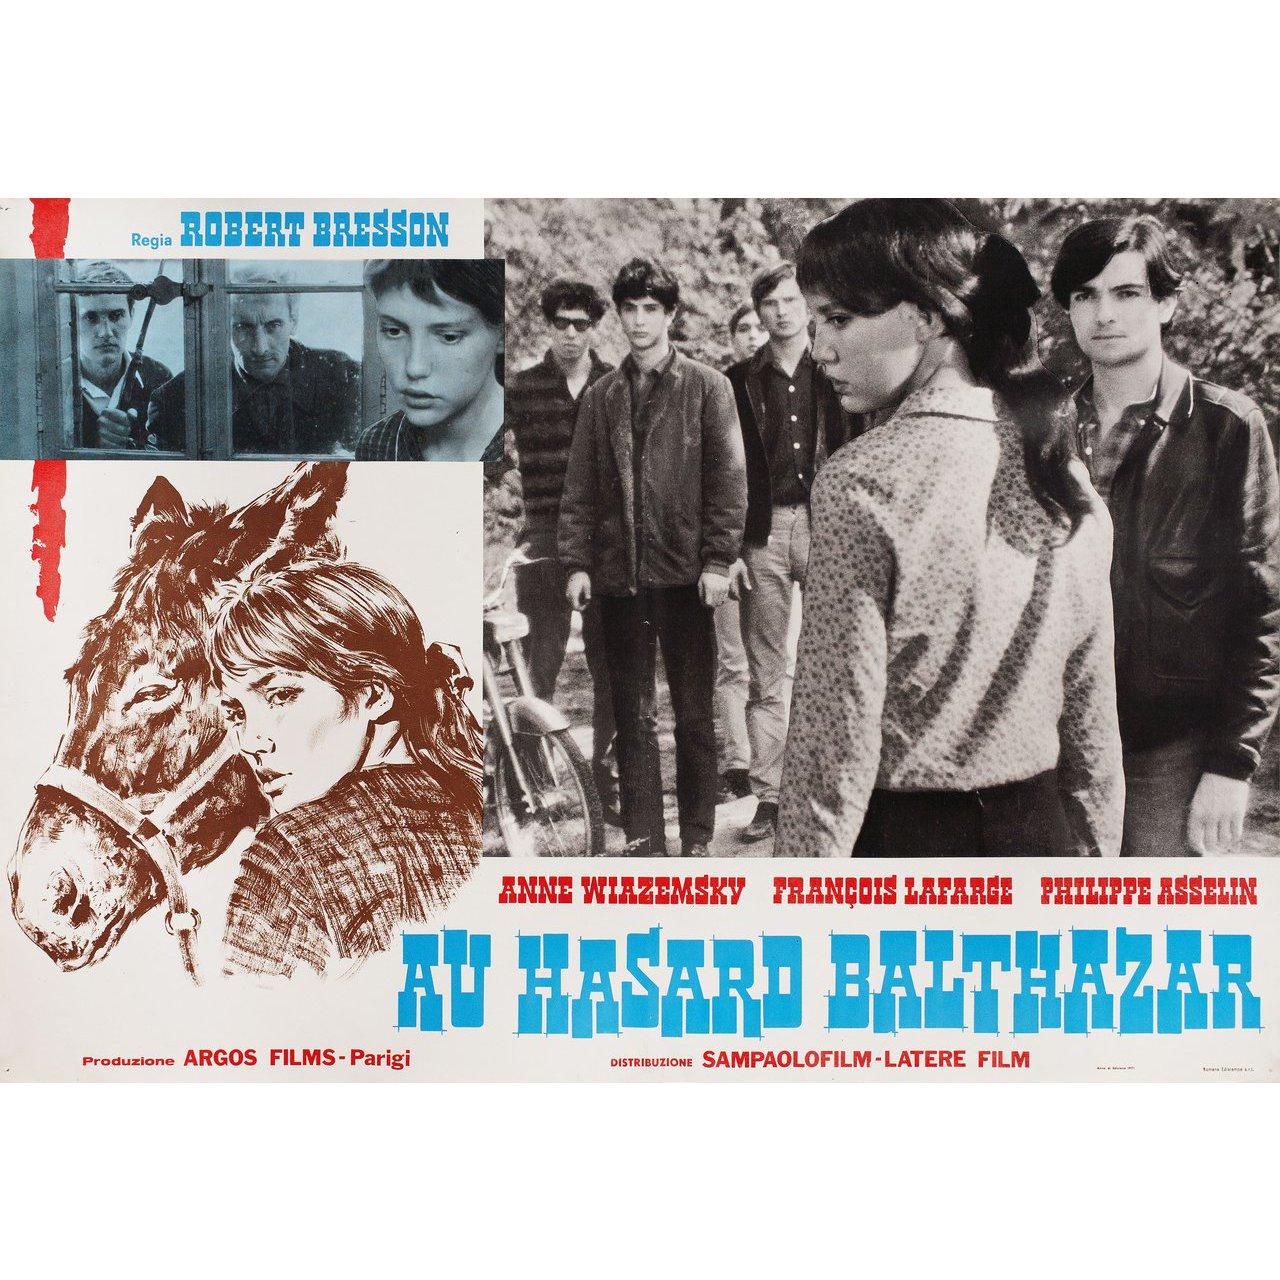 Original 1971 Italian fotobusta poster for the 1966 film Au Hasard Balthazar directed by Robert Bresson with Anne Wiazemsky / Walter Green / Francois Lafarge / Jean-Claude Guilbert. Very good-fine condition, rolled. Please note: the size is stated